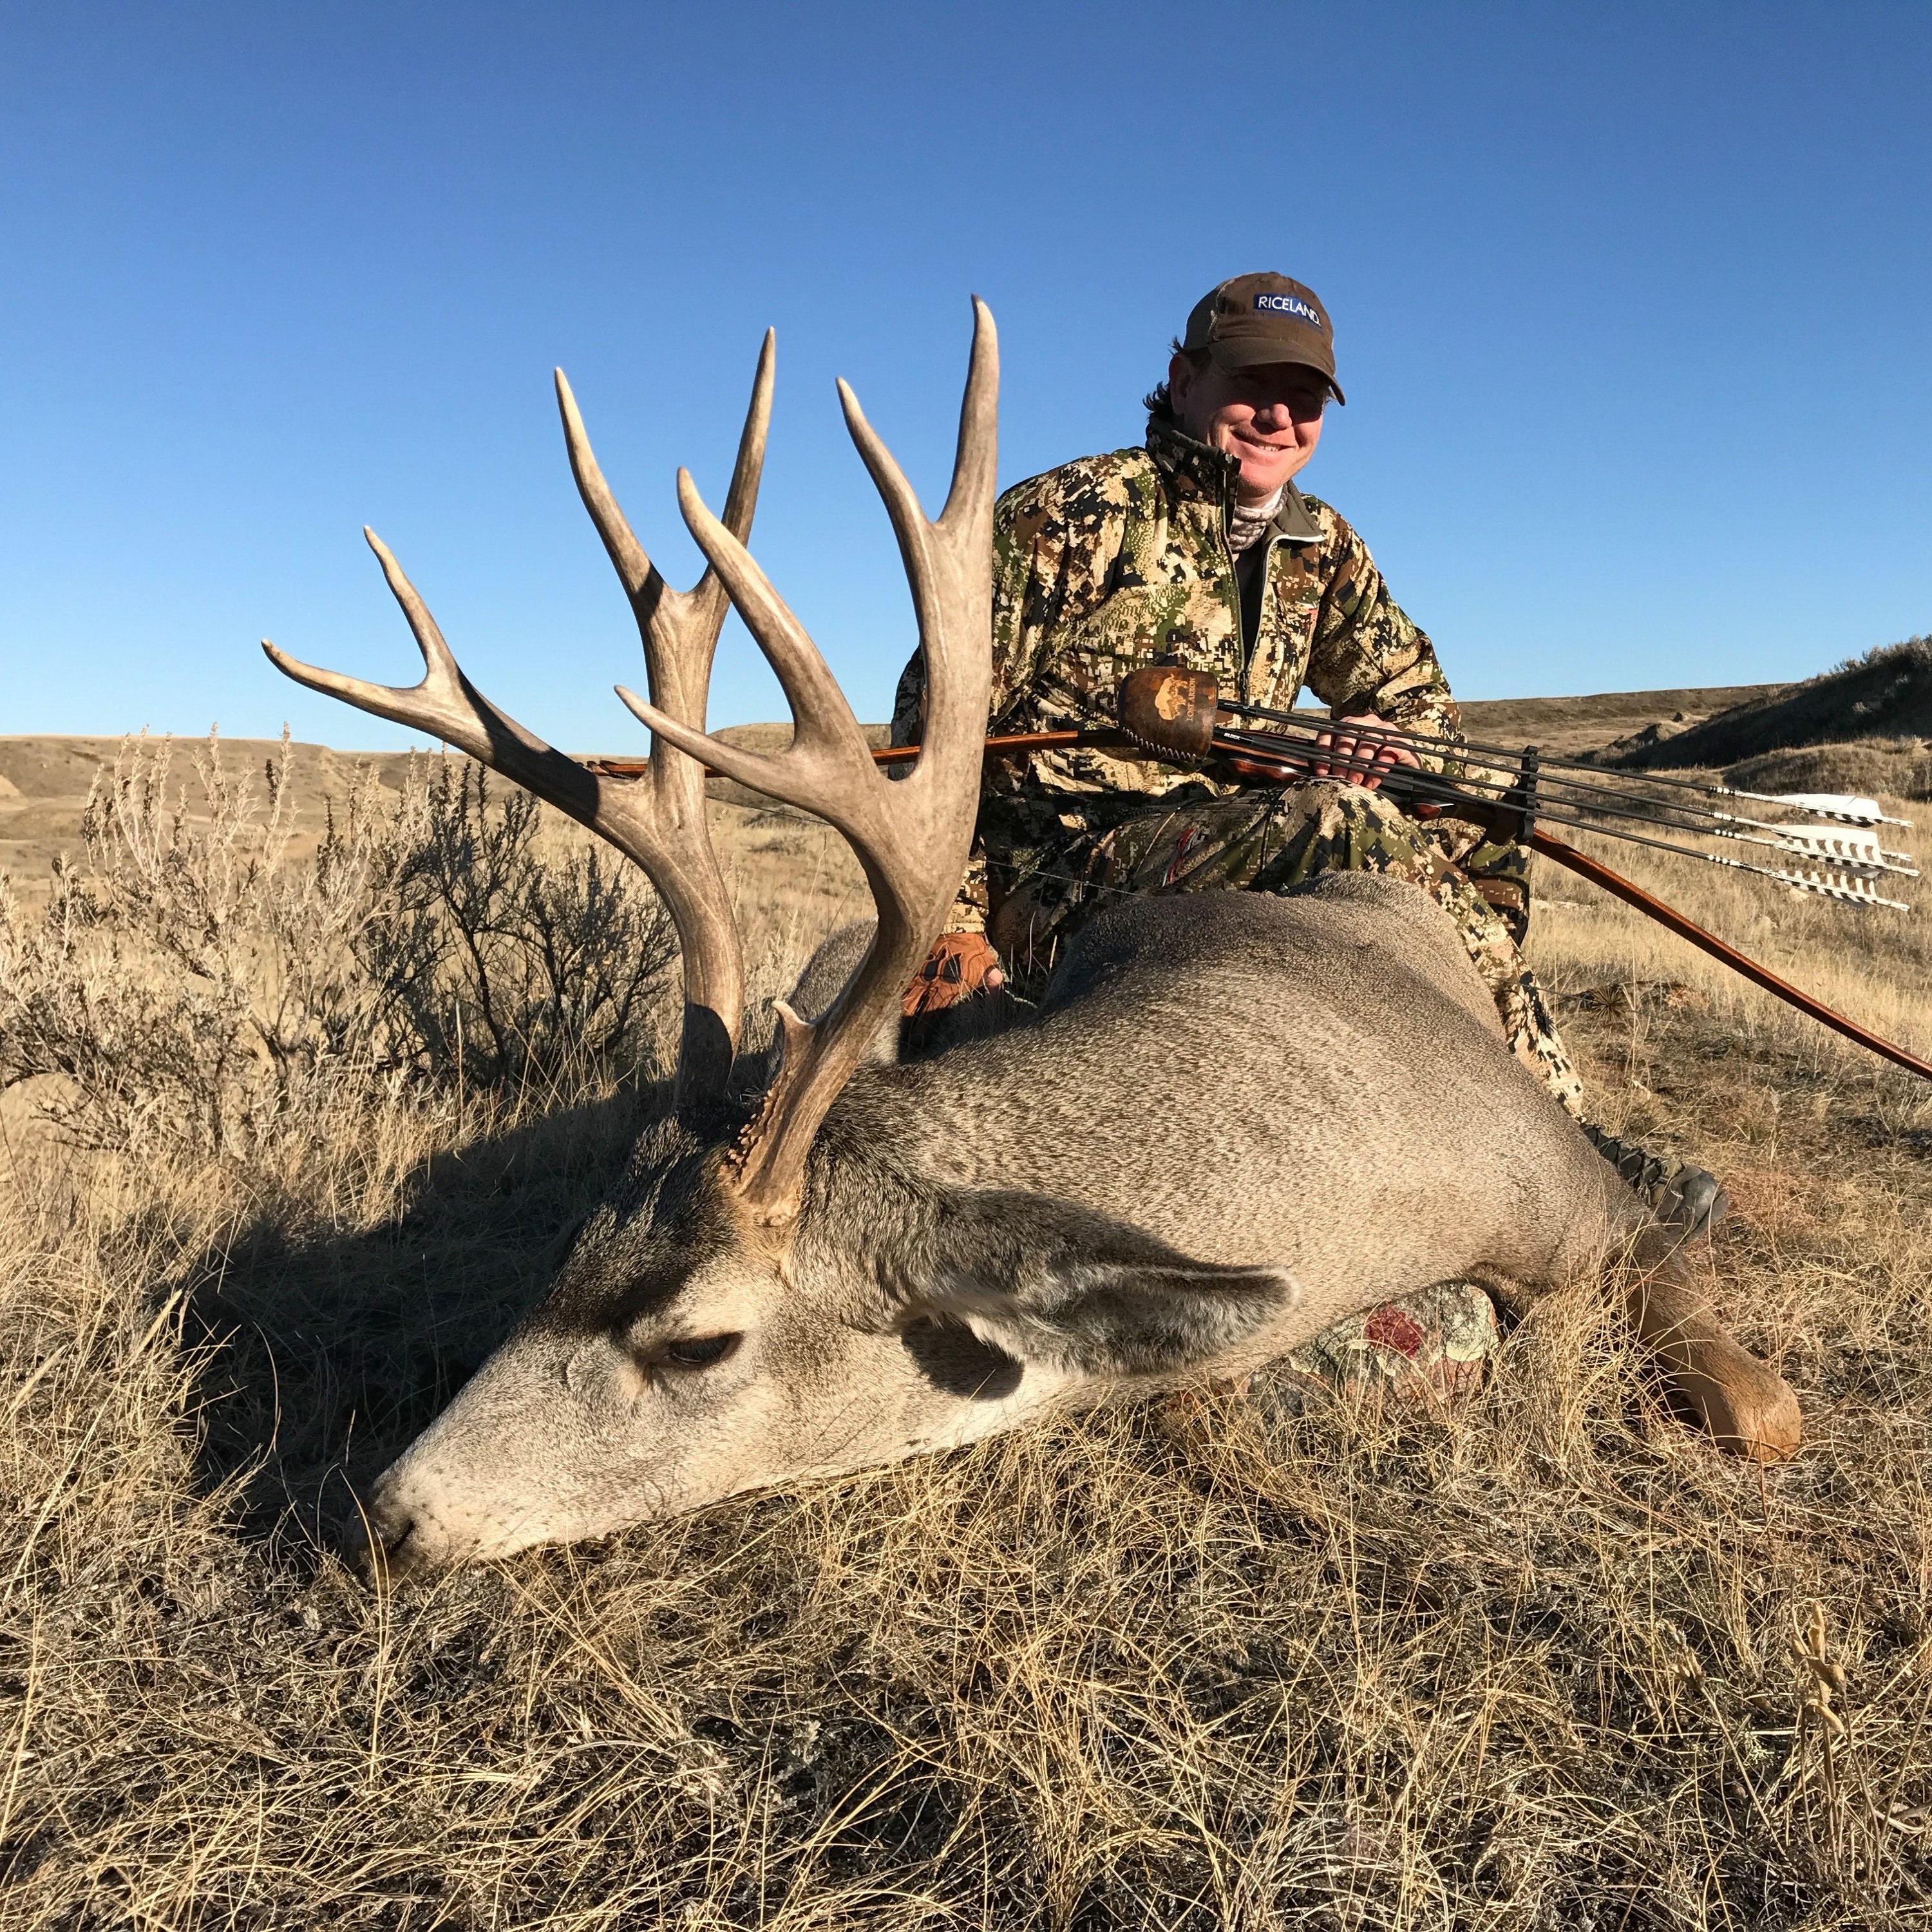 Episode 250: Next Level Bowhunting with Bryan Broderick